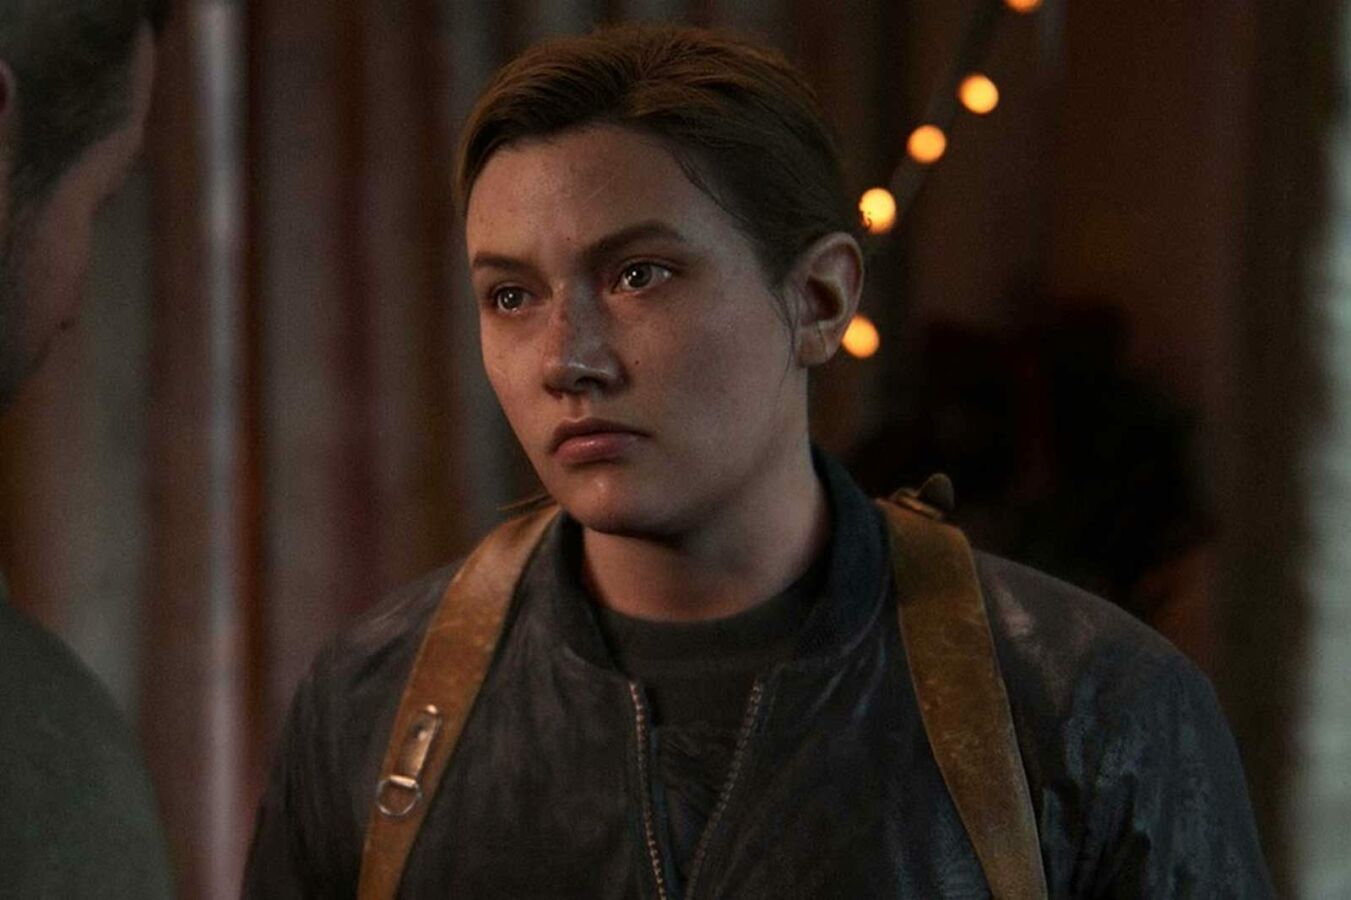 HBO reportedly close to casting Abby for The Last of Us Season 2 - Xfire